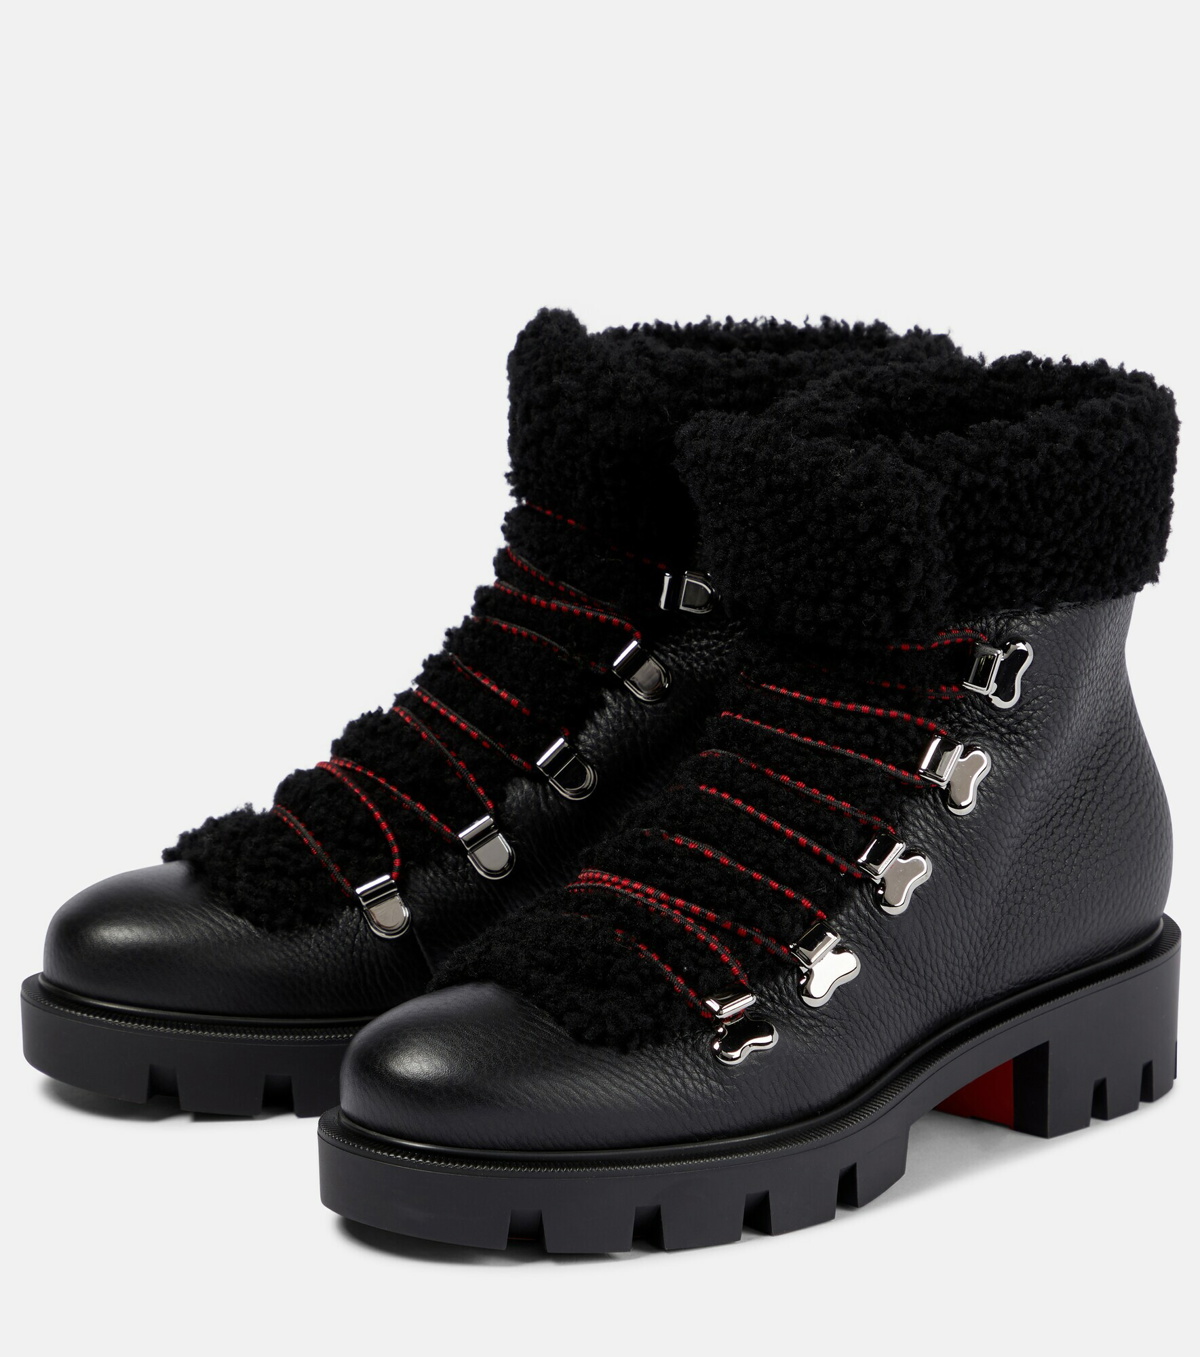 Christian Louboutin - Edelvizir shearling-lined leather ankle boots ...